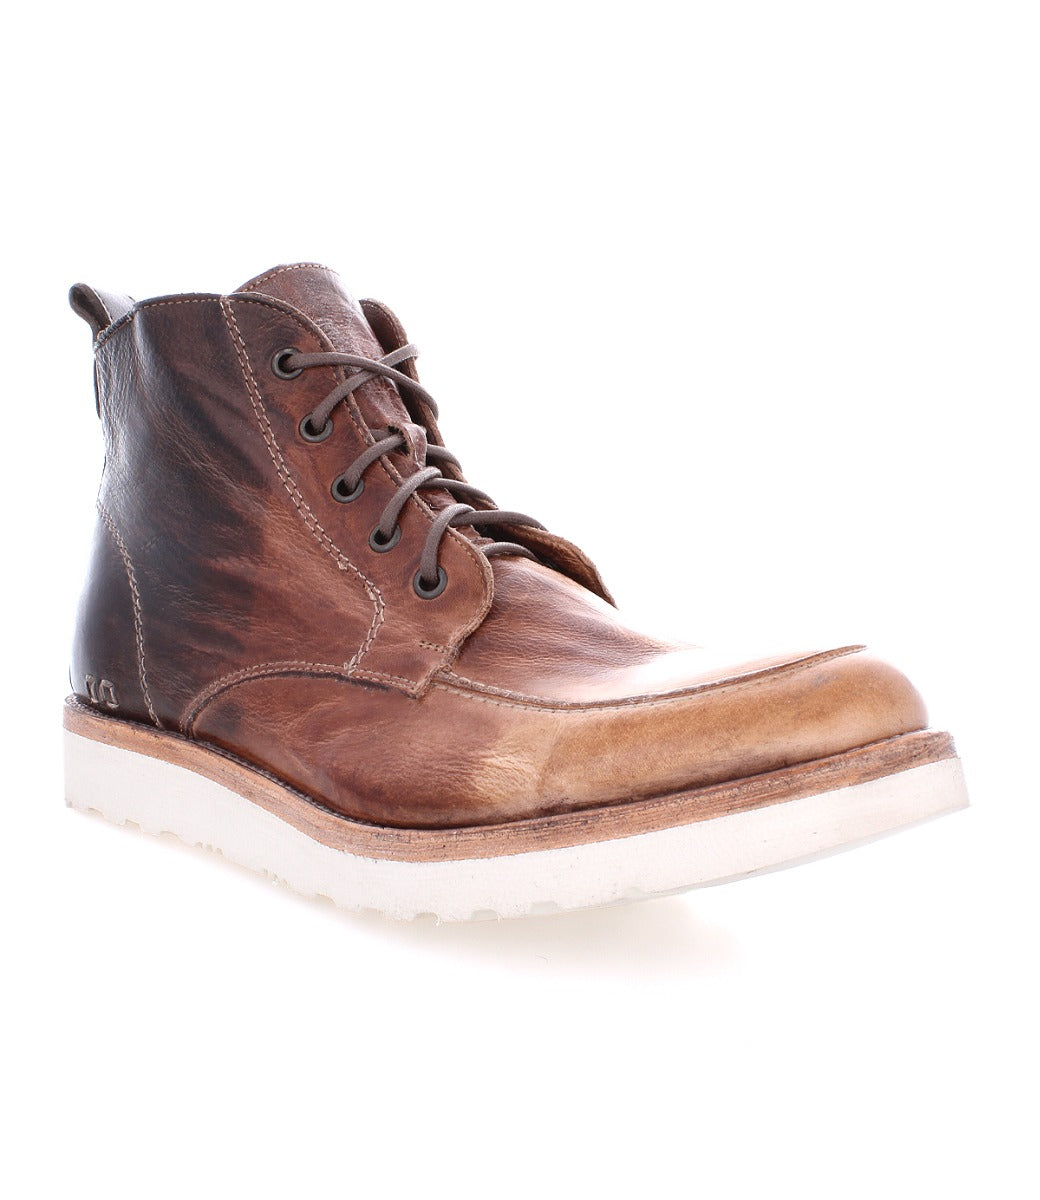 Side view of a single men's Bed Stu Lincoln brown leather work boot with laces on a white background.